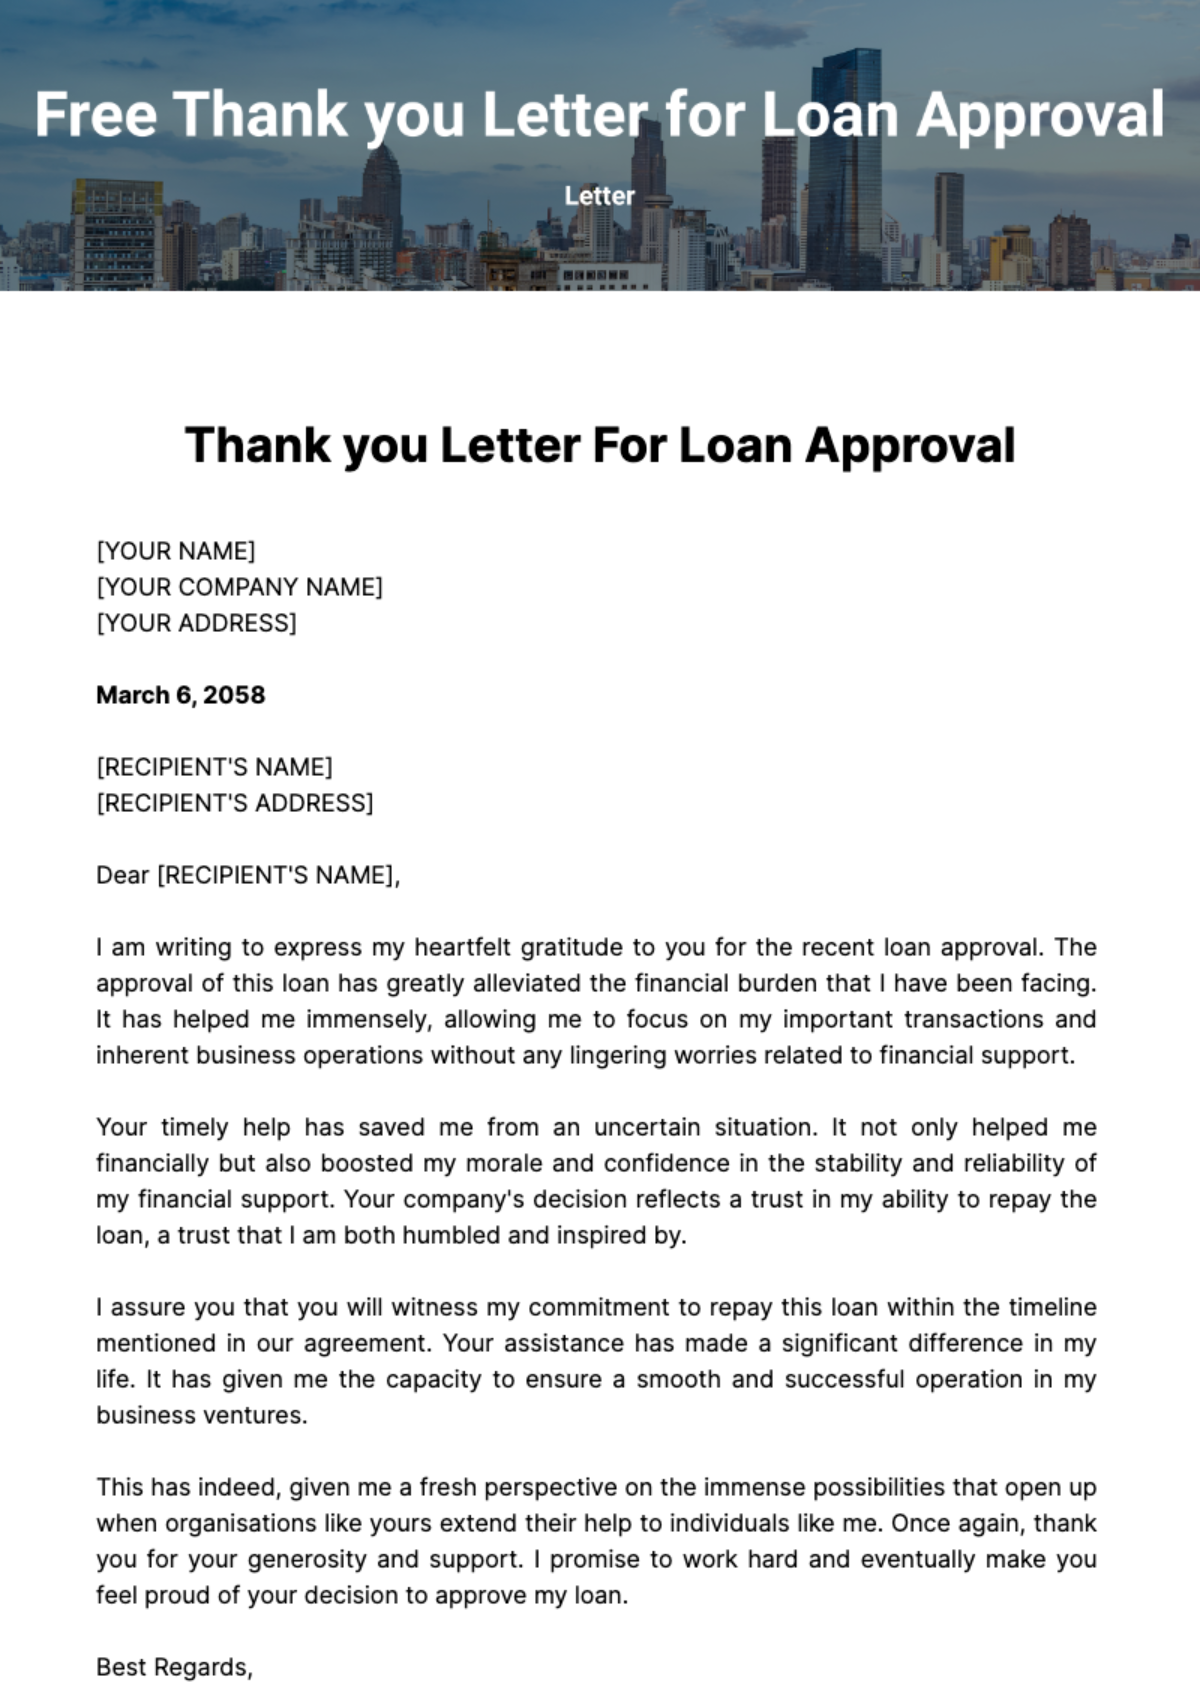 Free Thank you Letter for Loan Approval Template